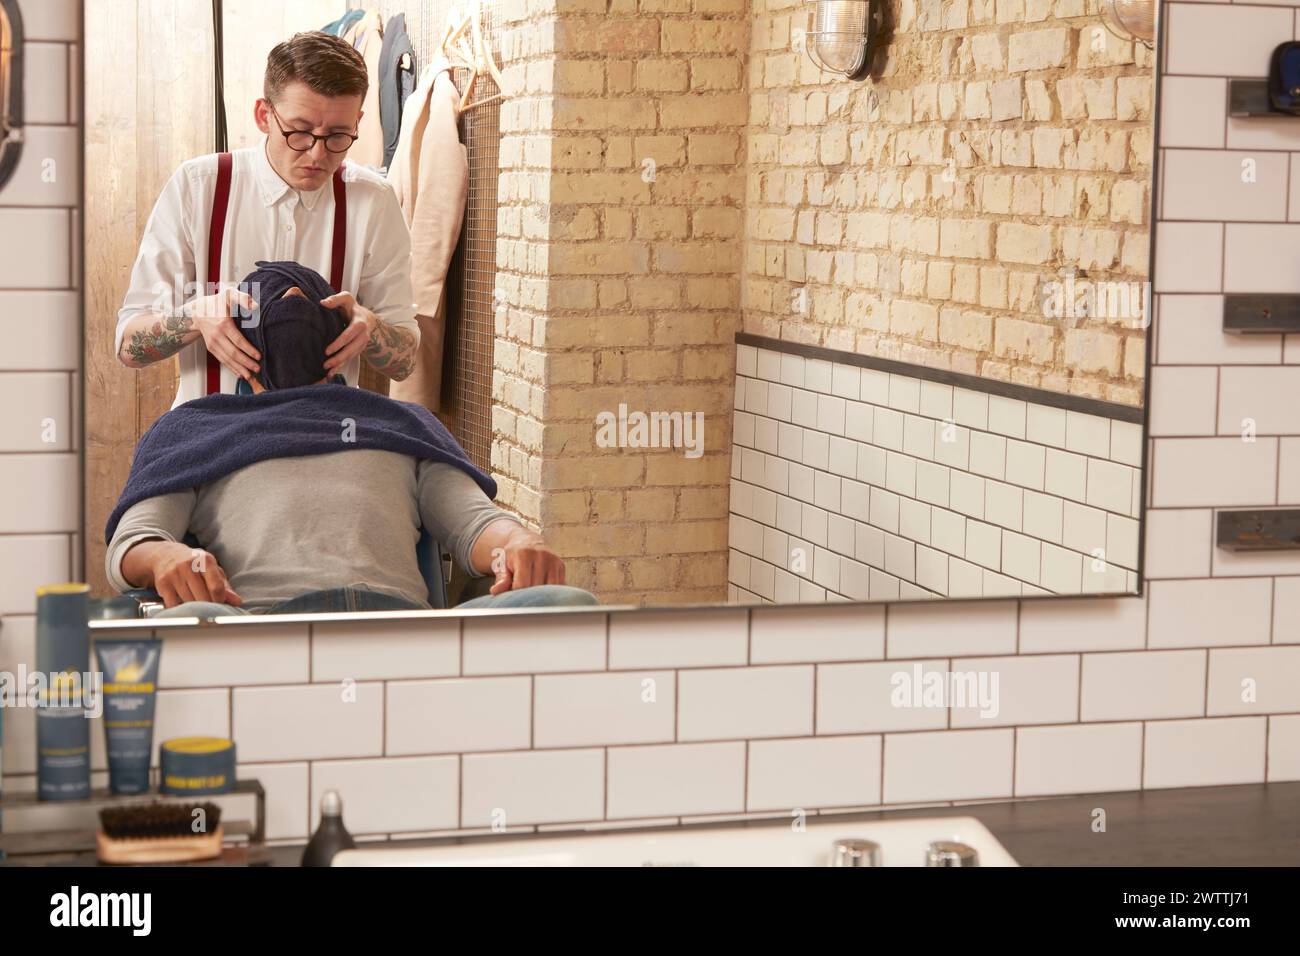 Barber giving a haircut to a client Stock Photo